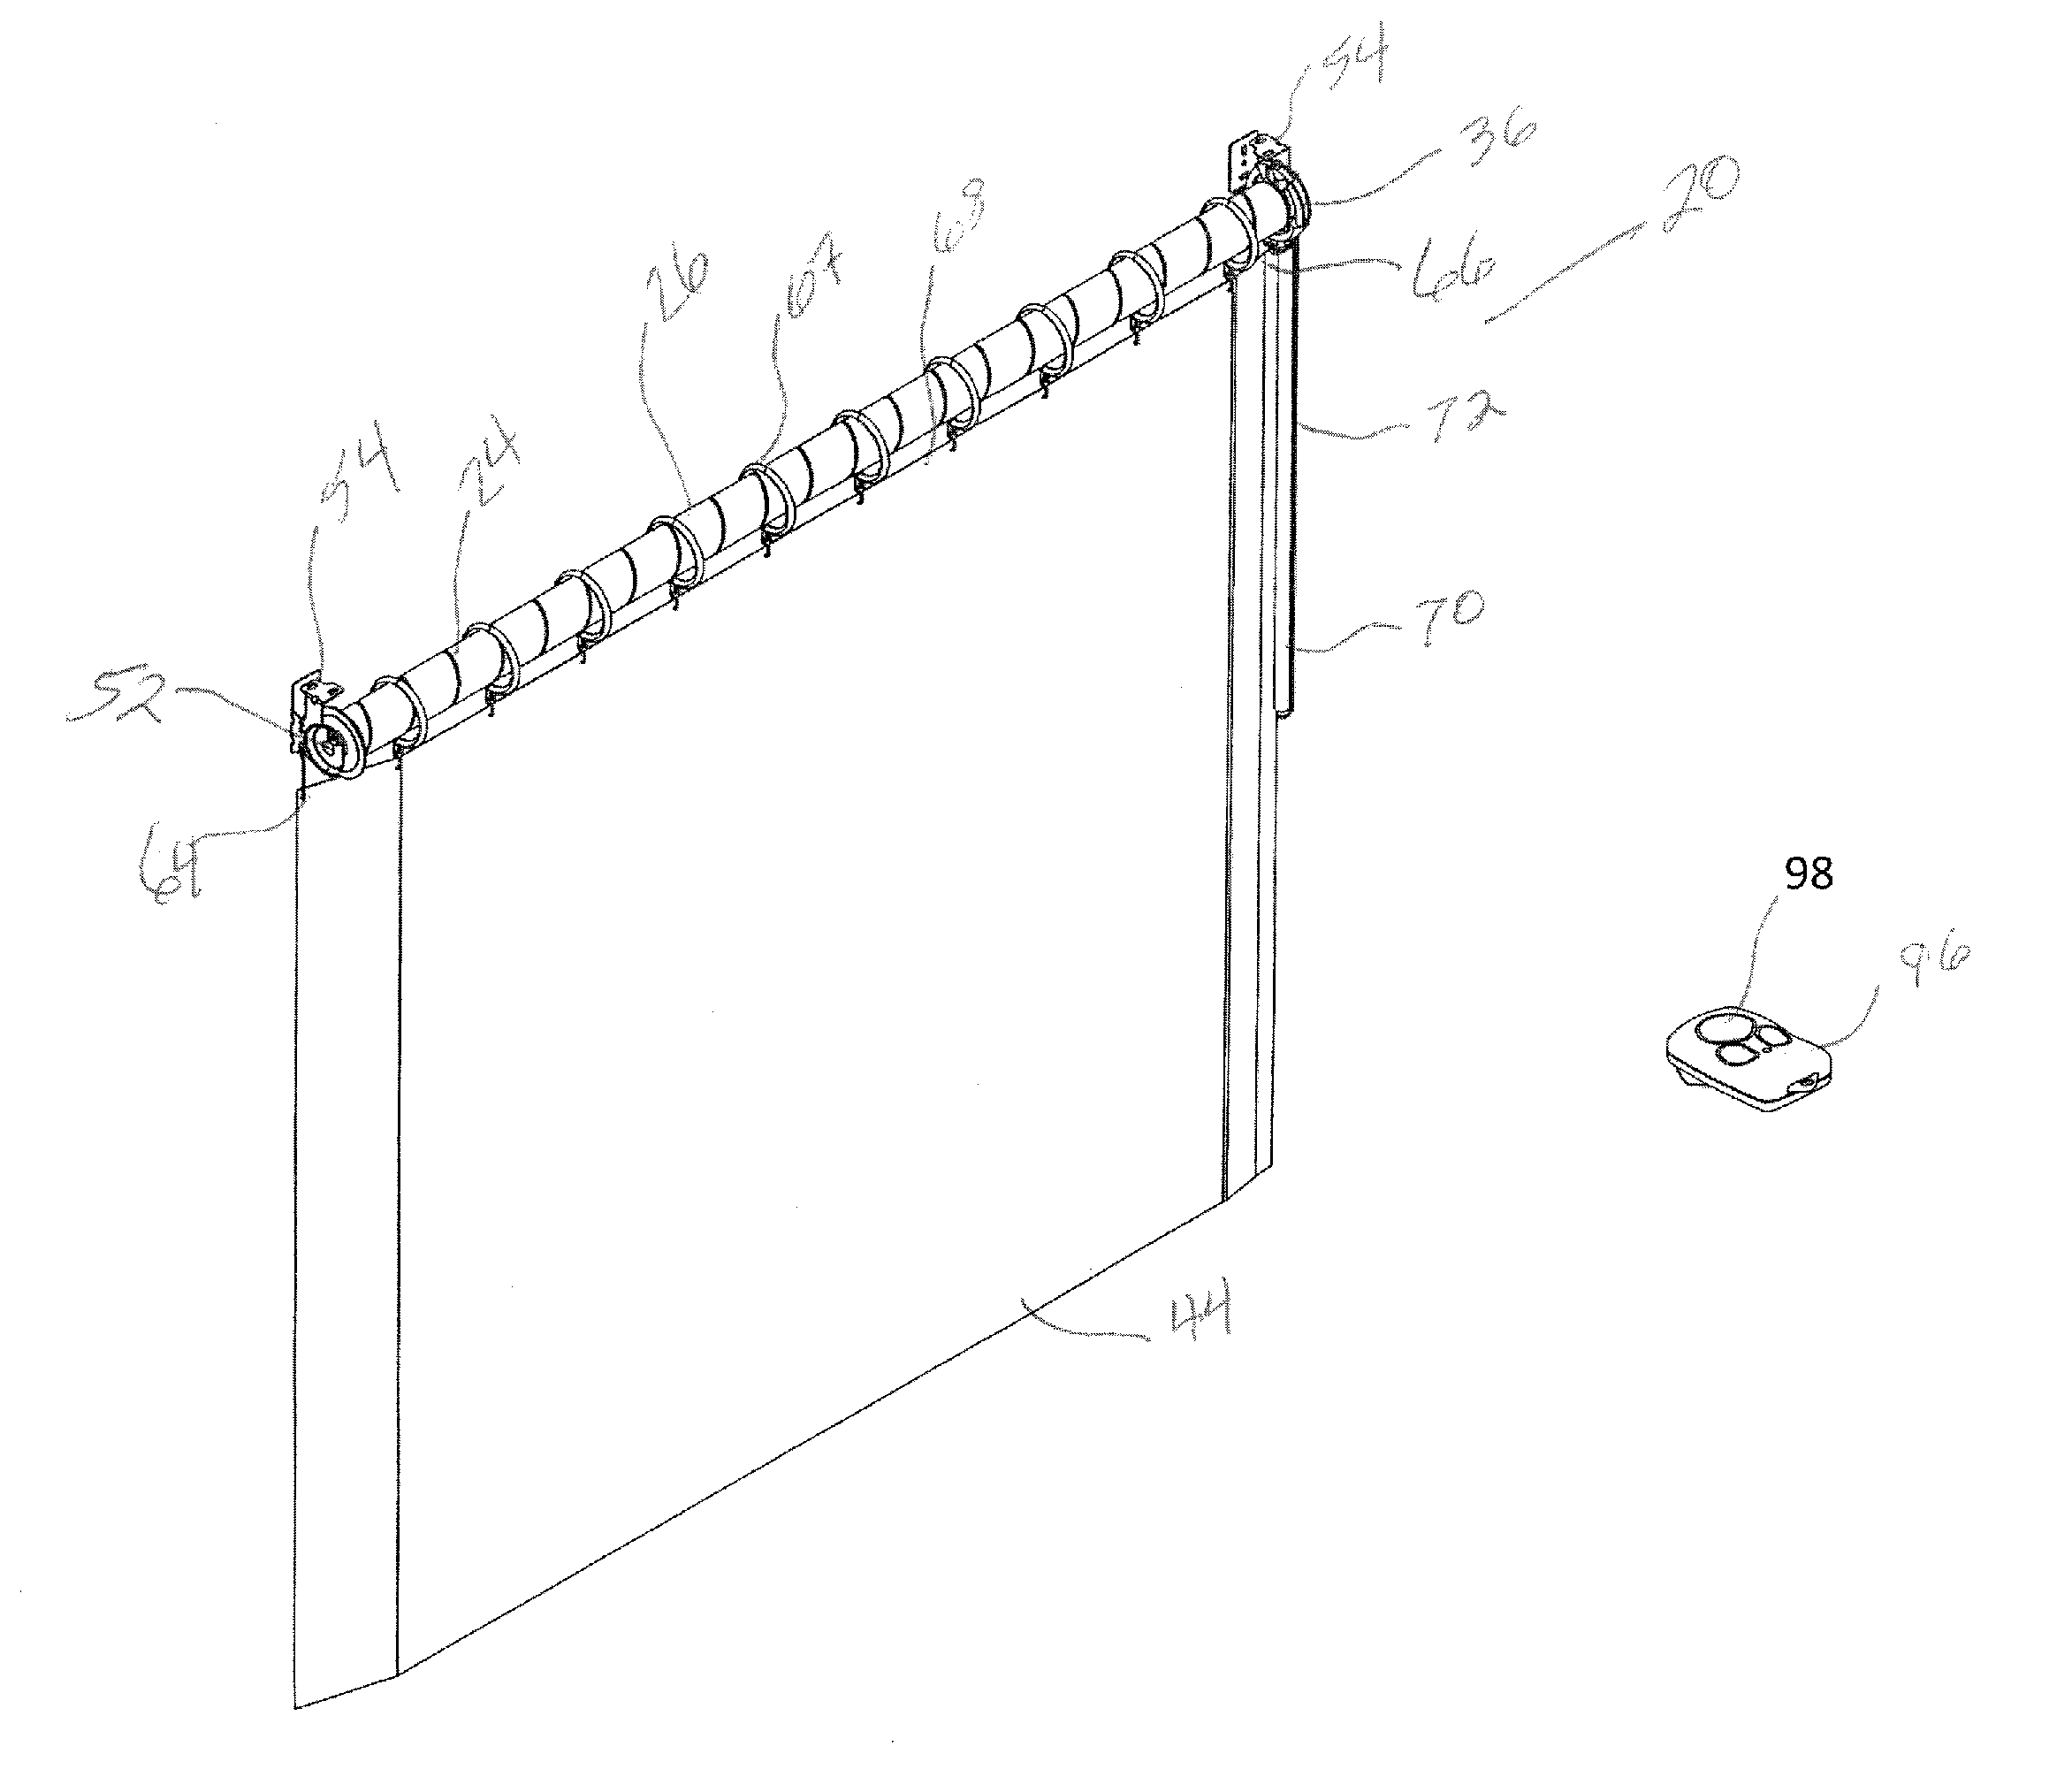 Method and apparatus for linked horizontal drapery panels having varying characteristics to be moved independently by a common drive system